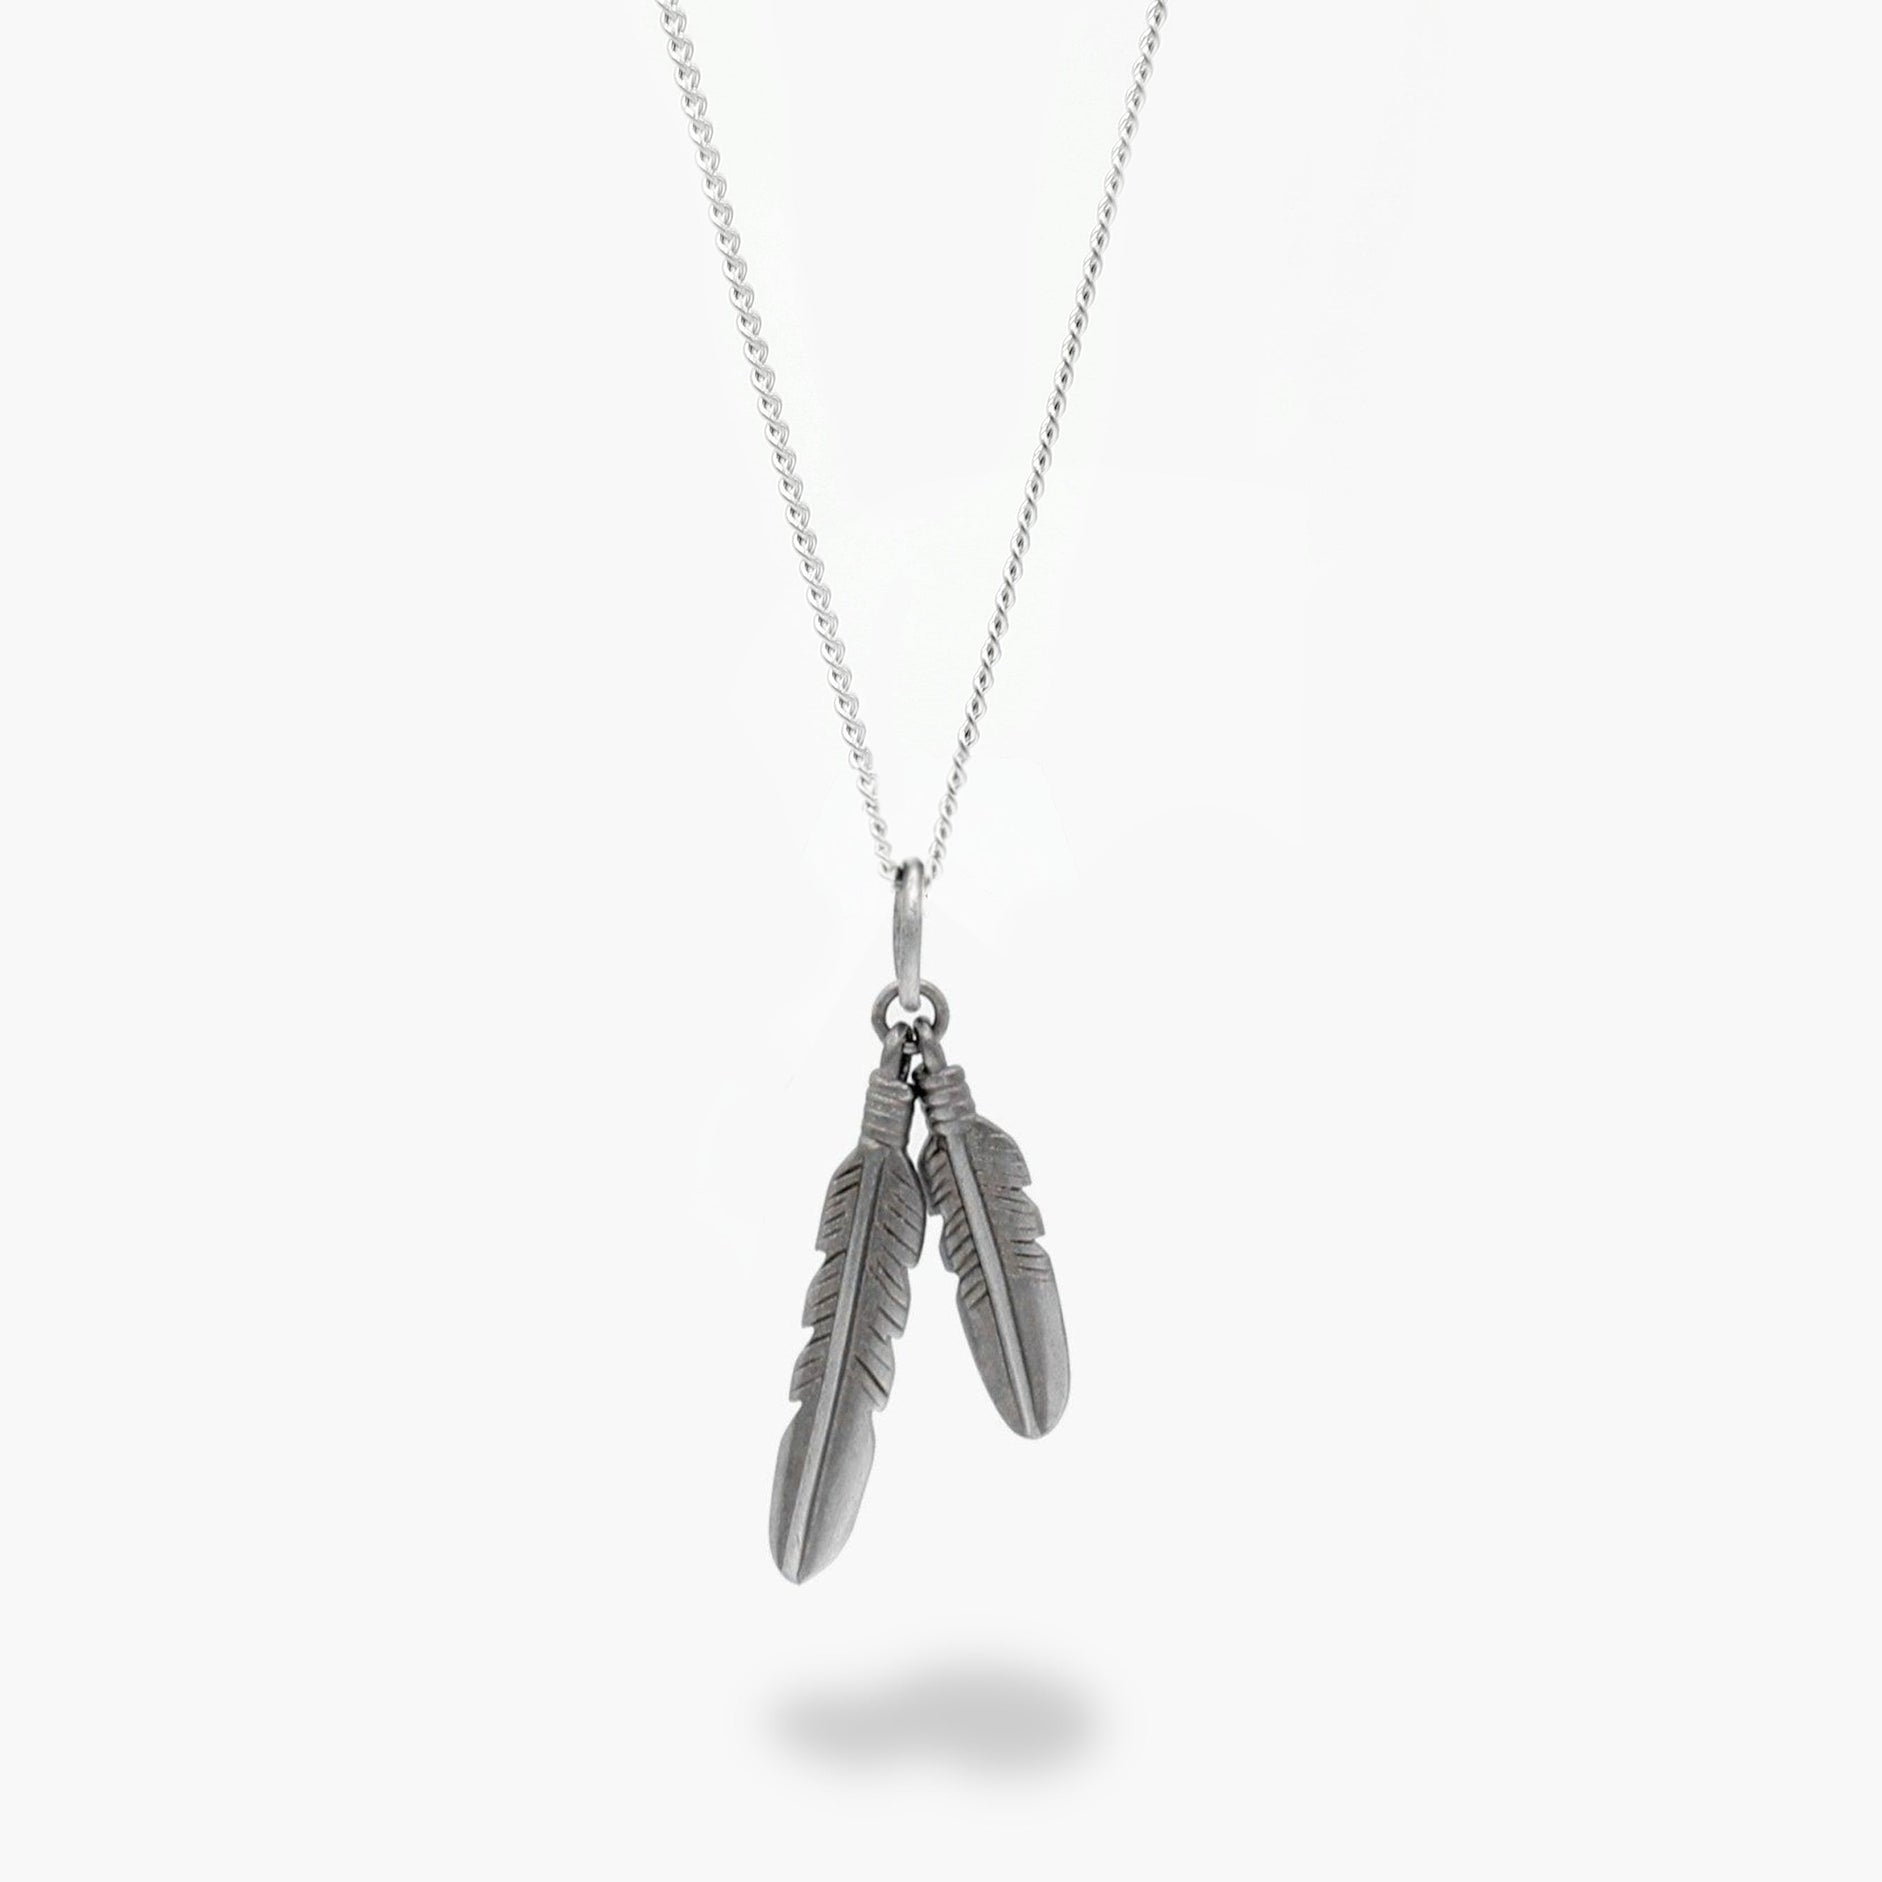 Small Feathers Duo Silver Necklace-Necklace-Kompsós